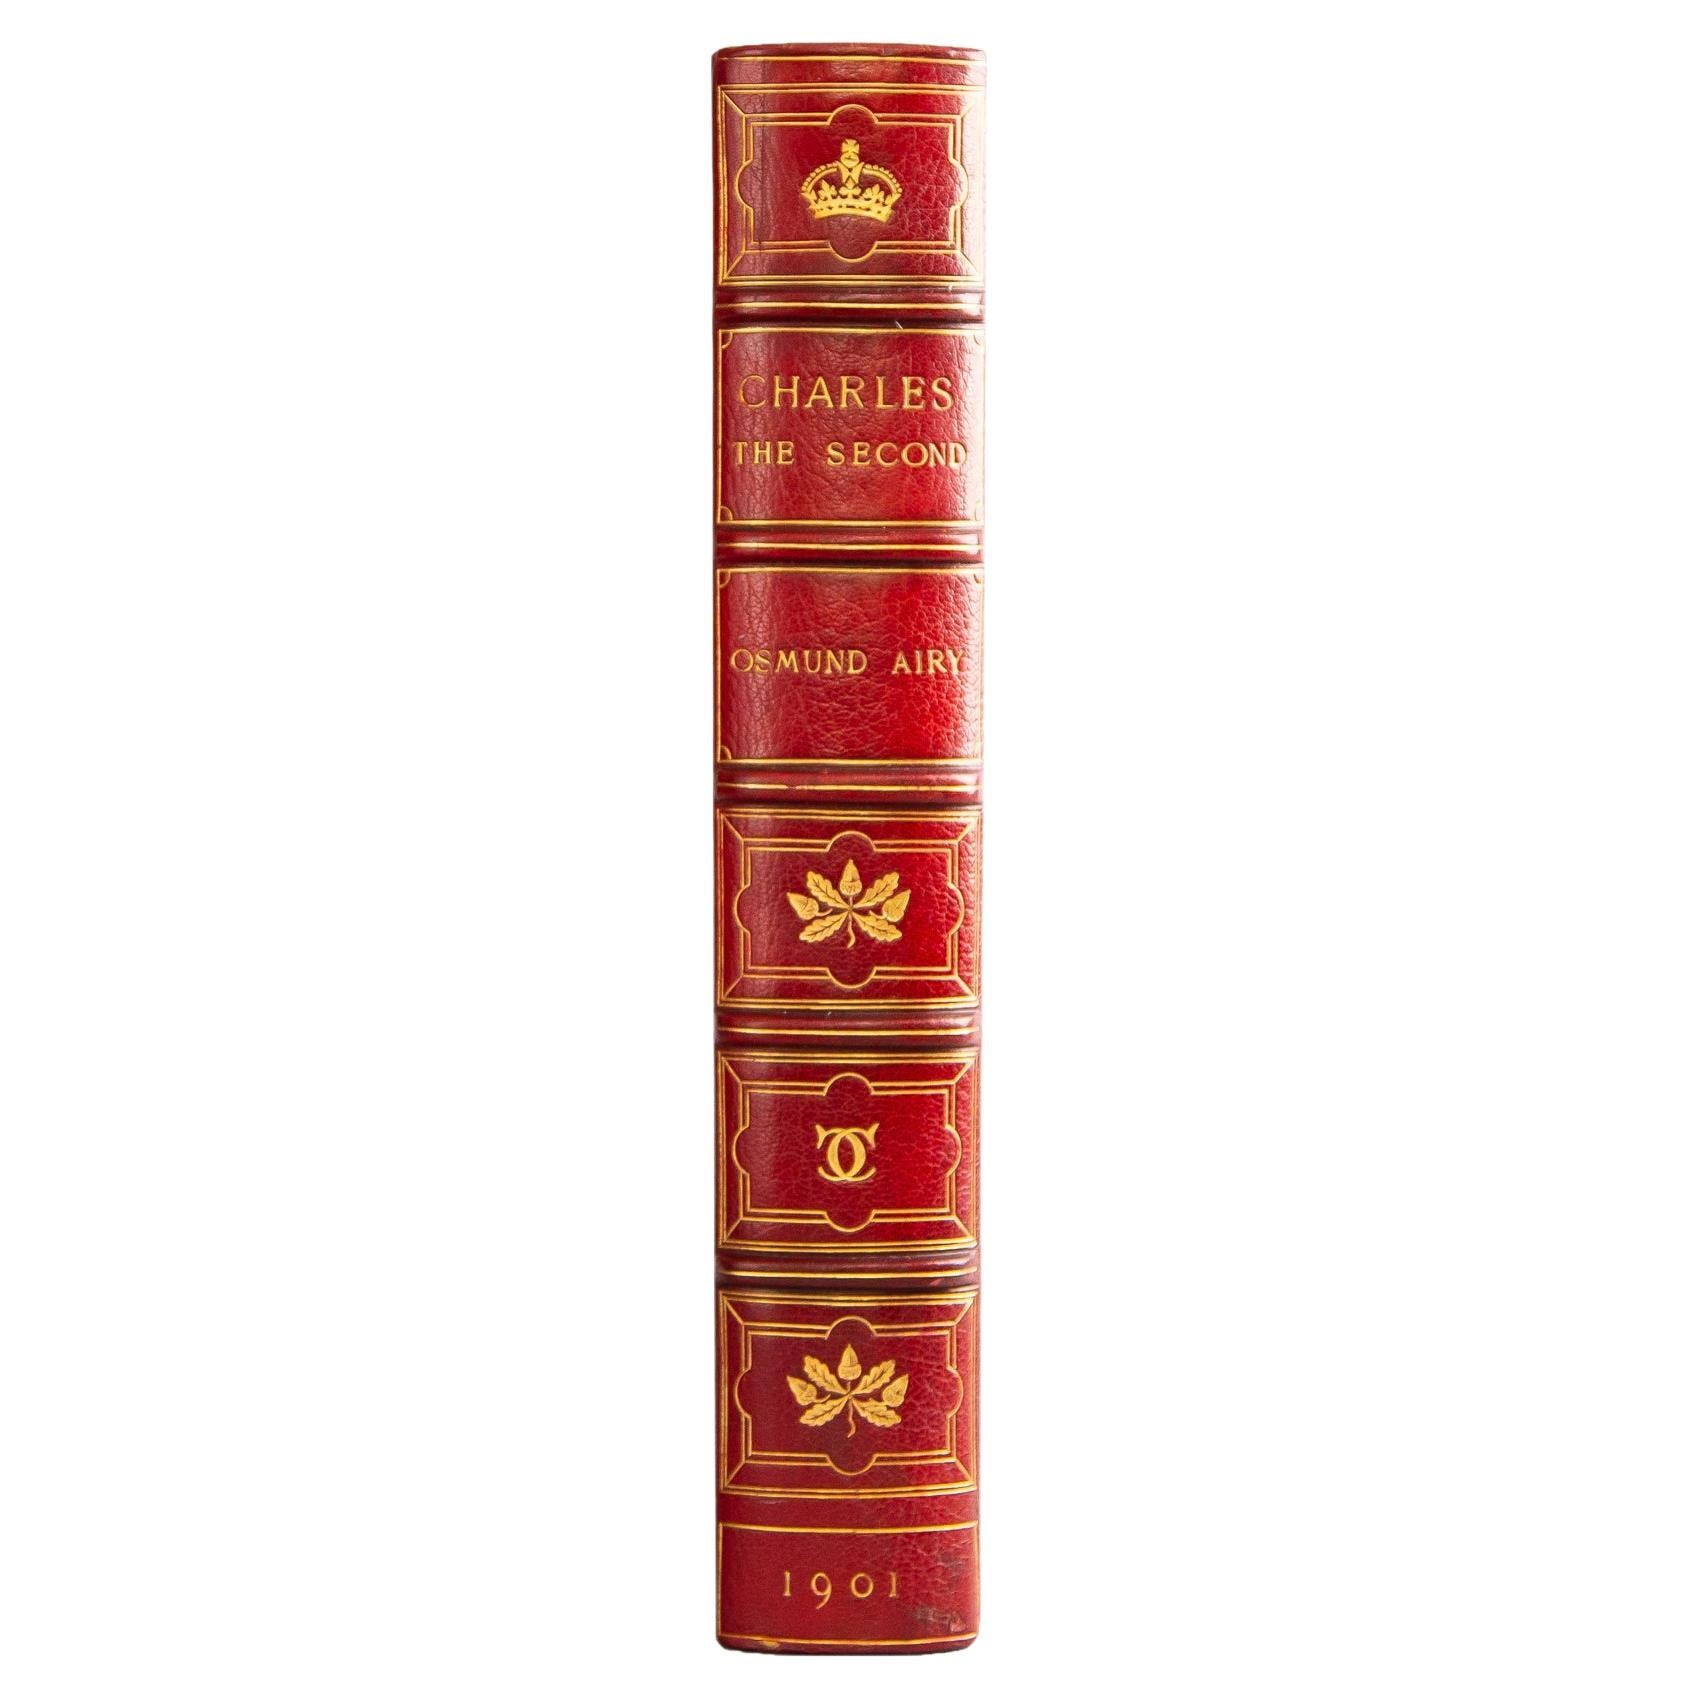 1 Volume, Osmund Airy, Charles the Second